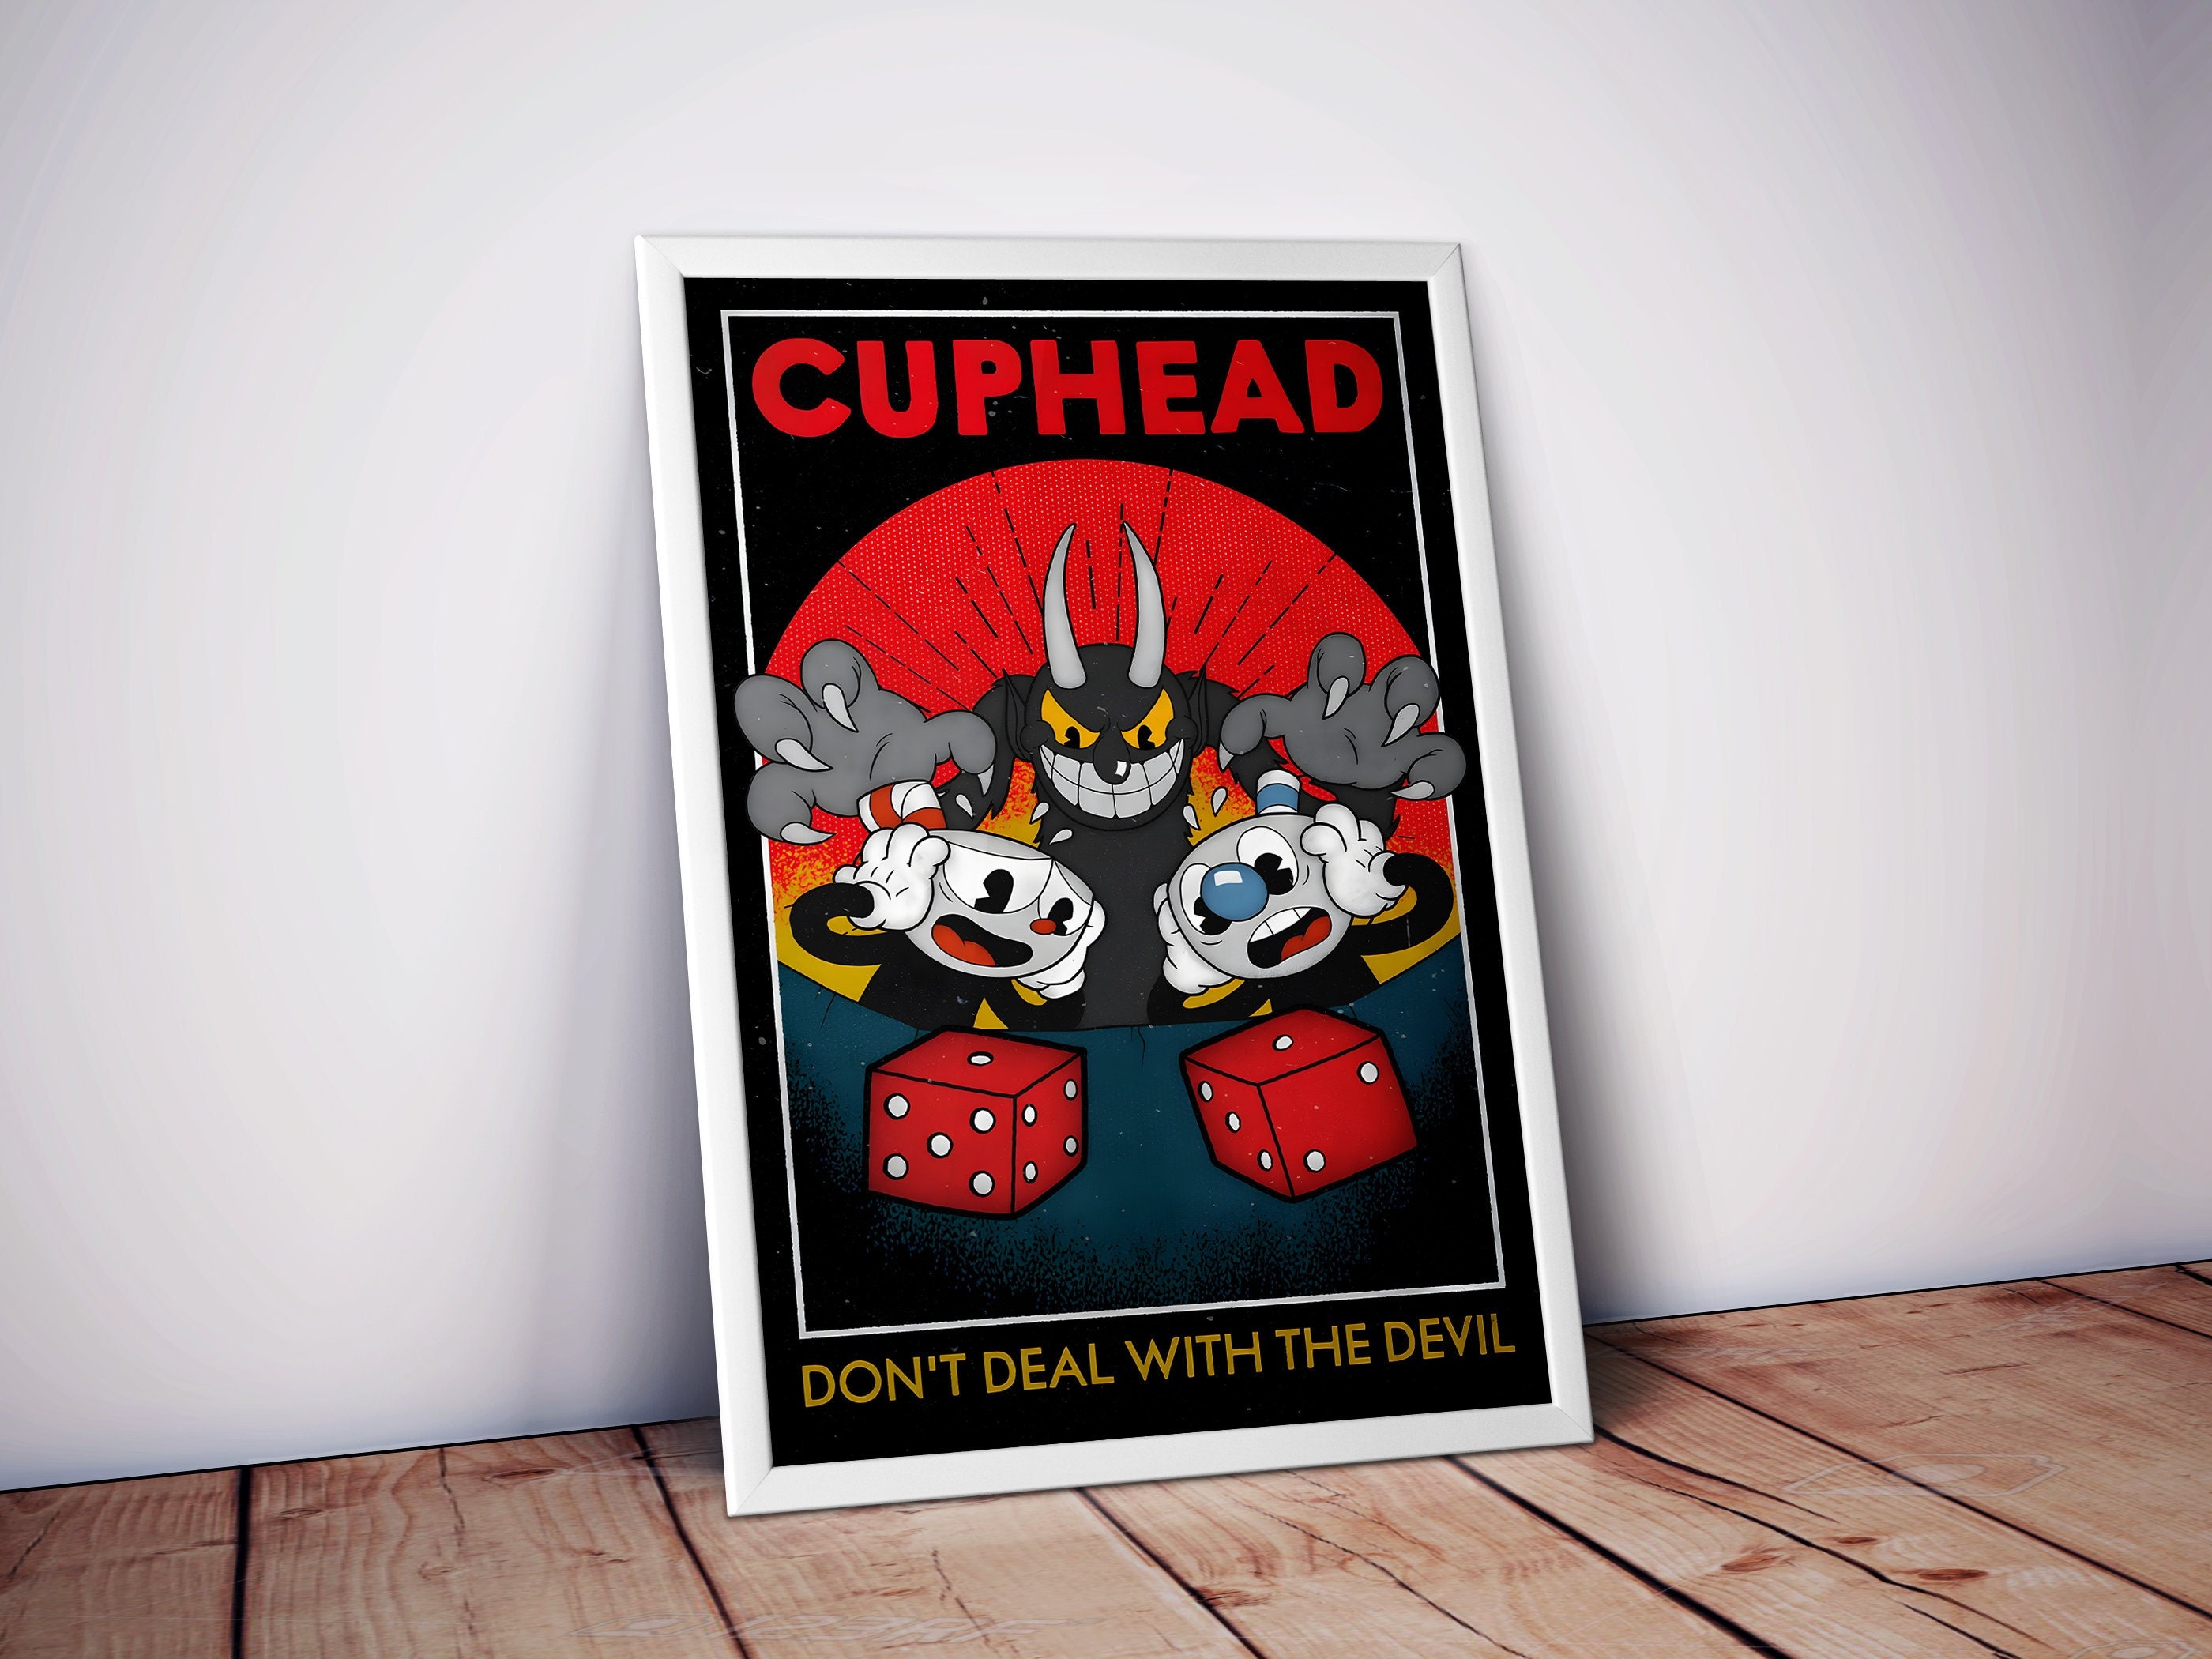 Wall Art Cuphead Characters The Devil Cagney Carnation King Dice Cala Maria  Mugman Poster Prints Set of 6 Size A4 (21cm x 29cm) Unframed GREAT GIFT :  : Home